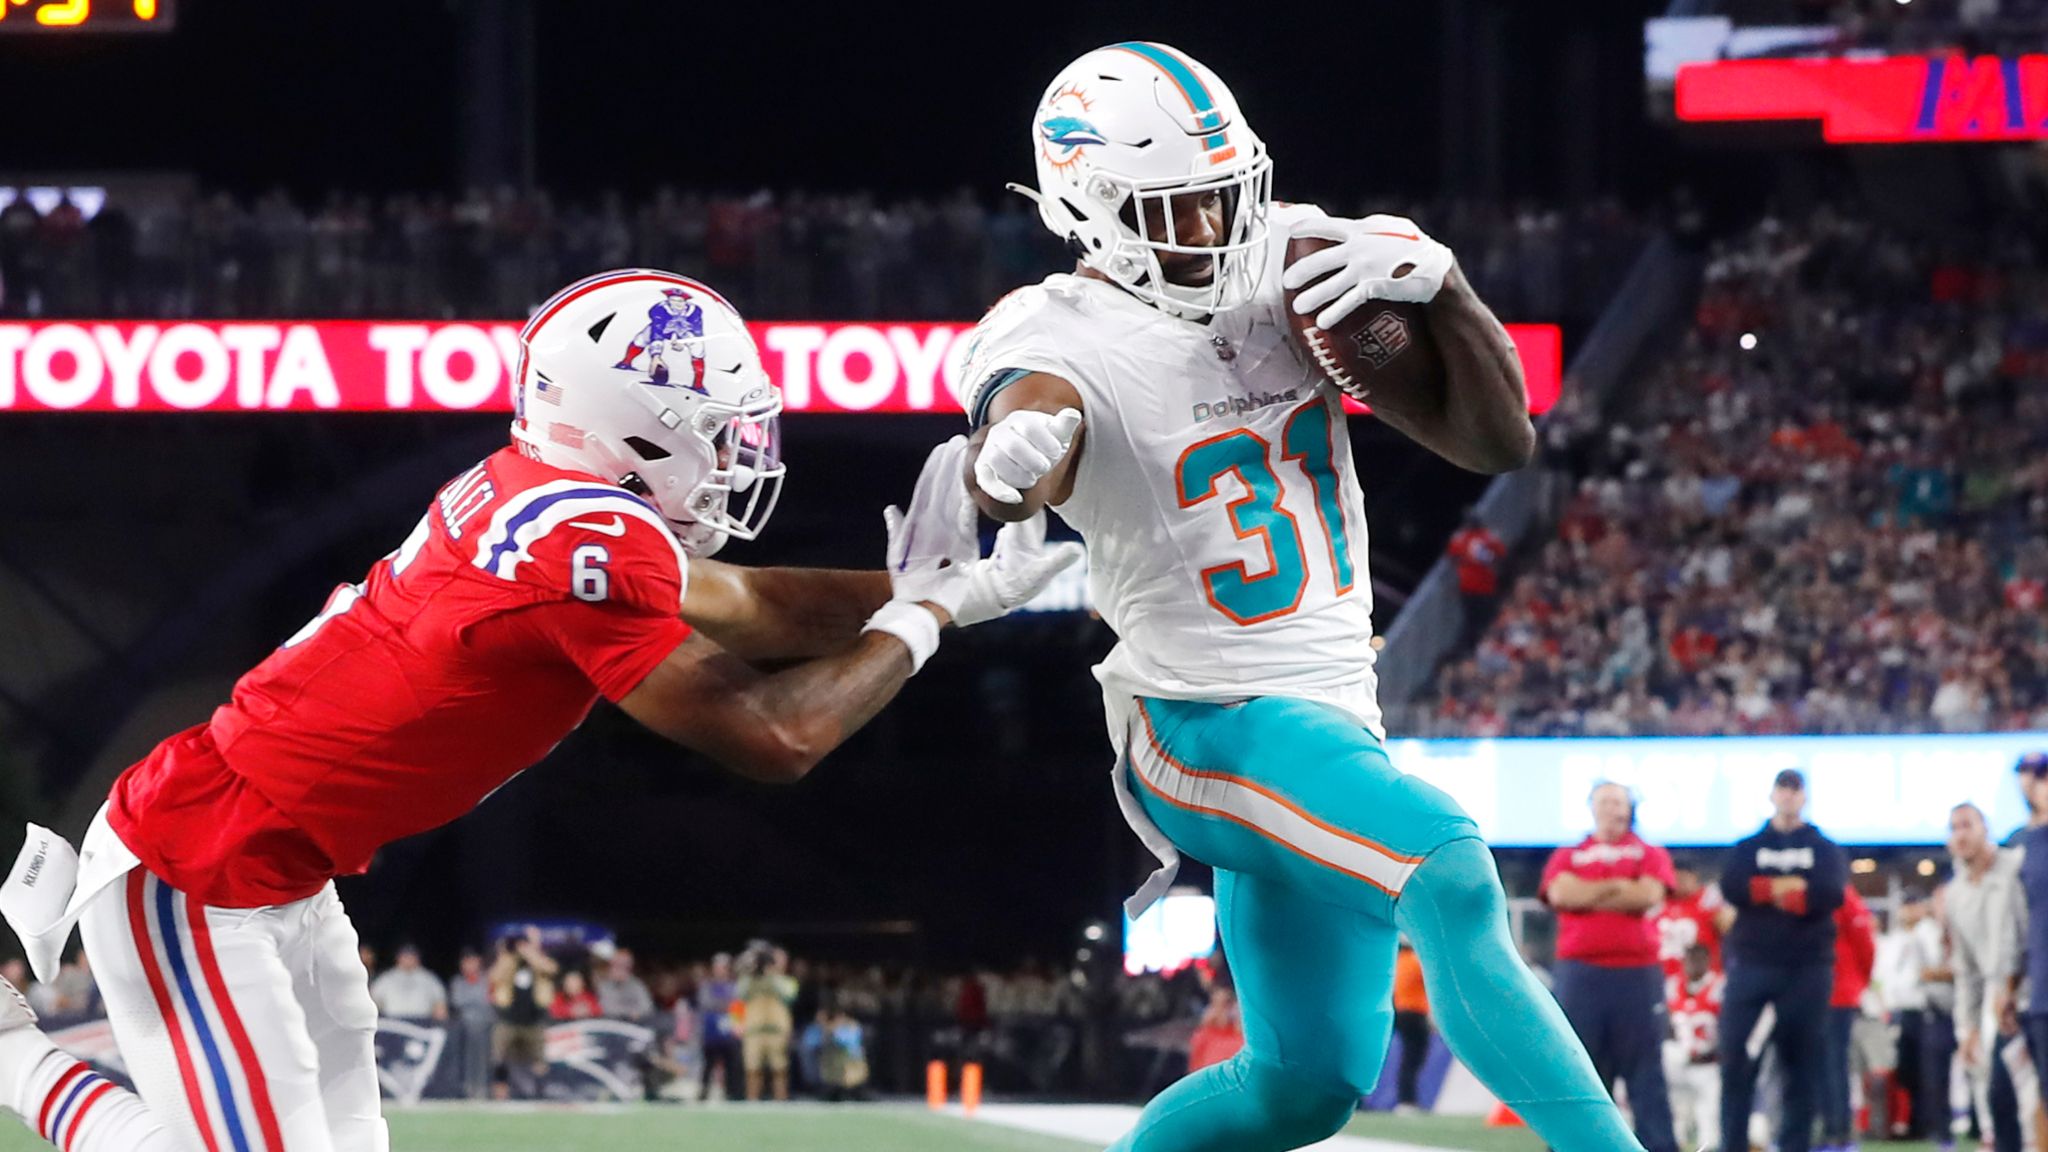 Miami Dolphins 24-17 New England Patriots: Hosts fall to 0-2 in